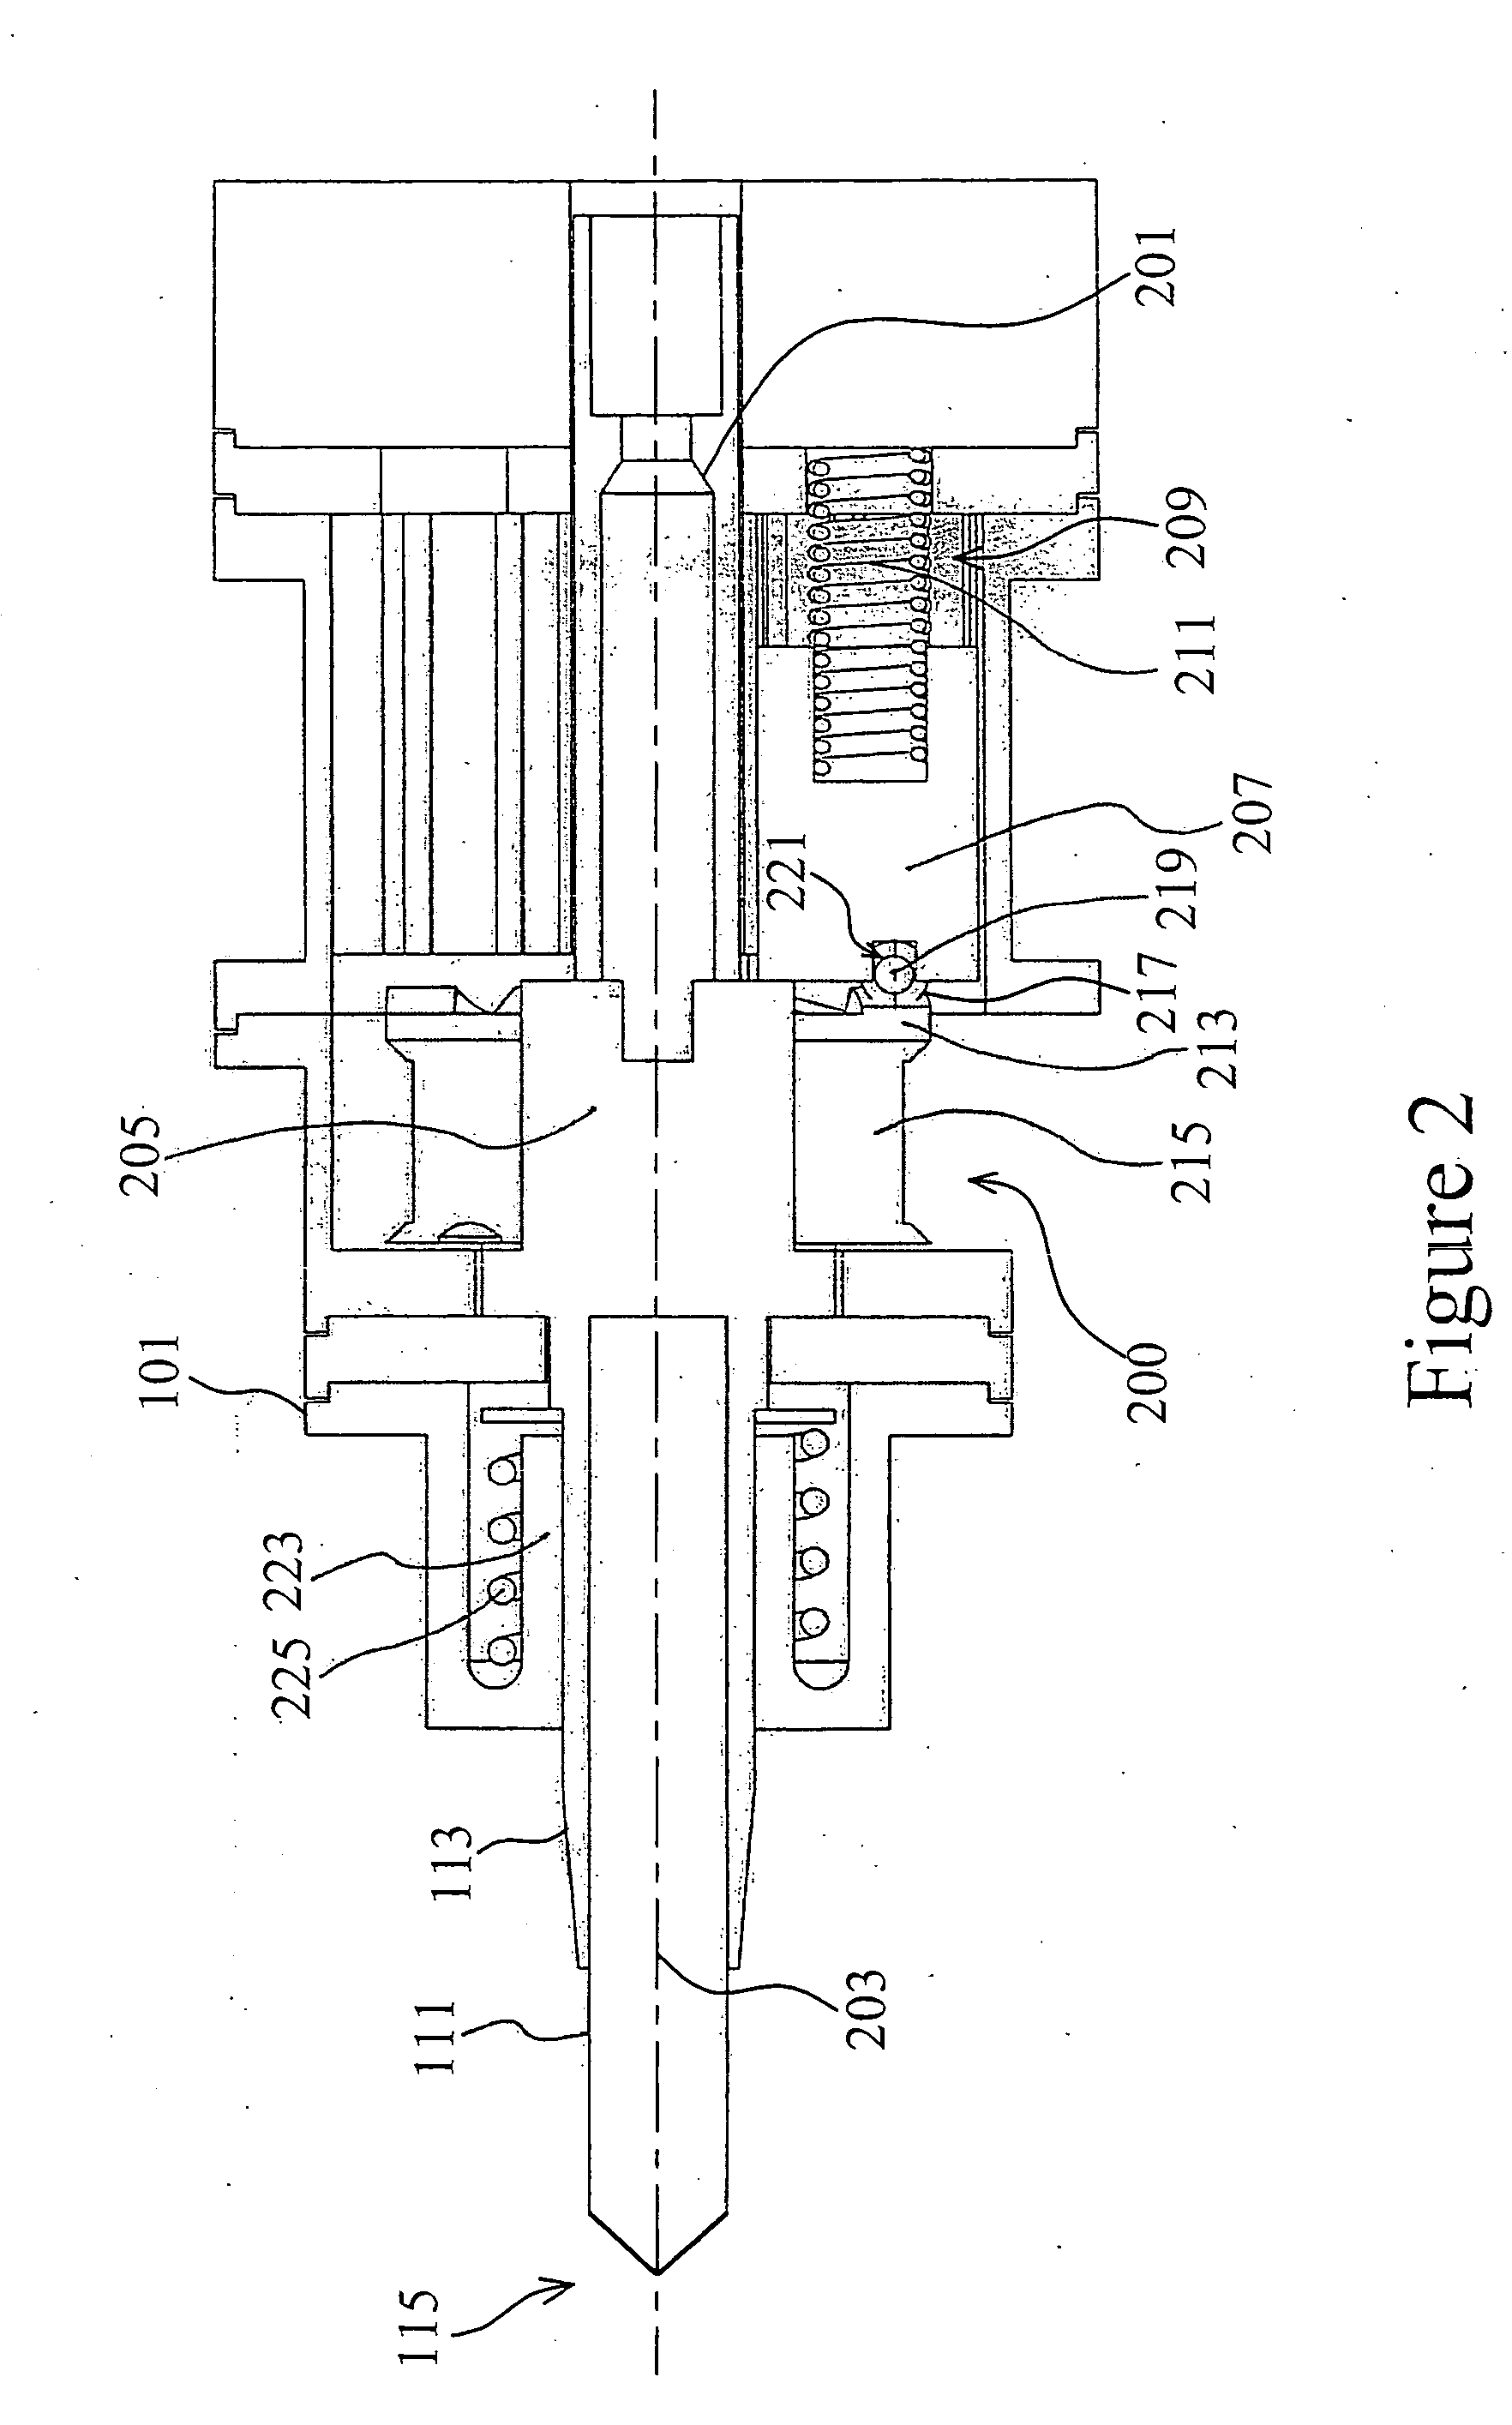 Impact mechanism for a hammer drill